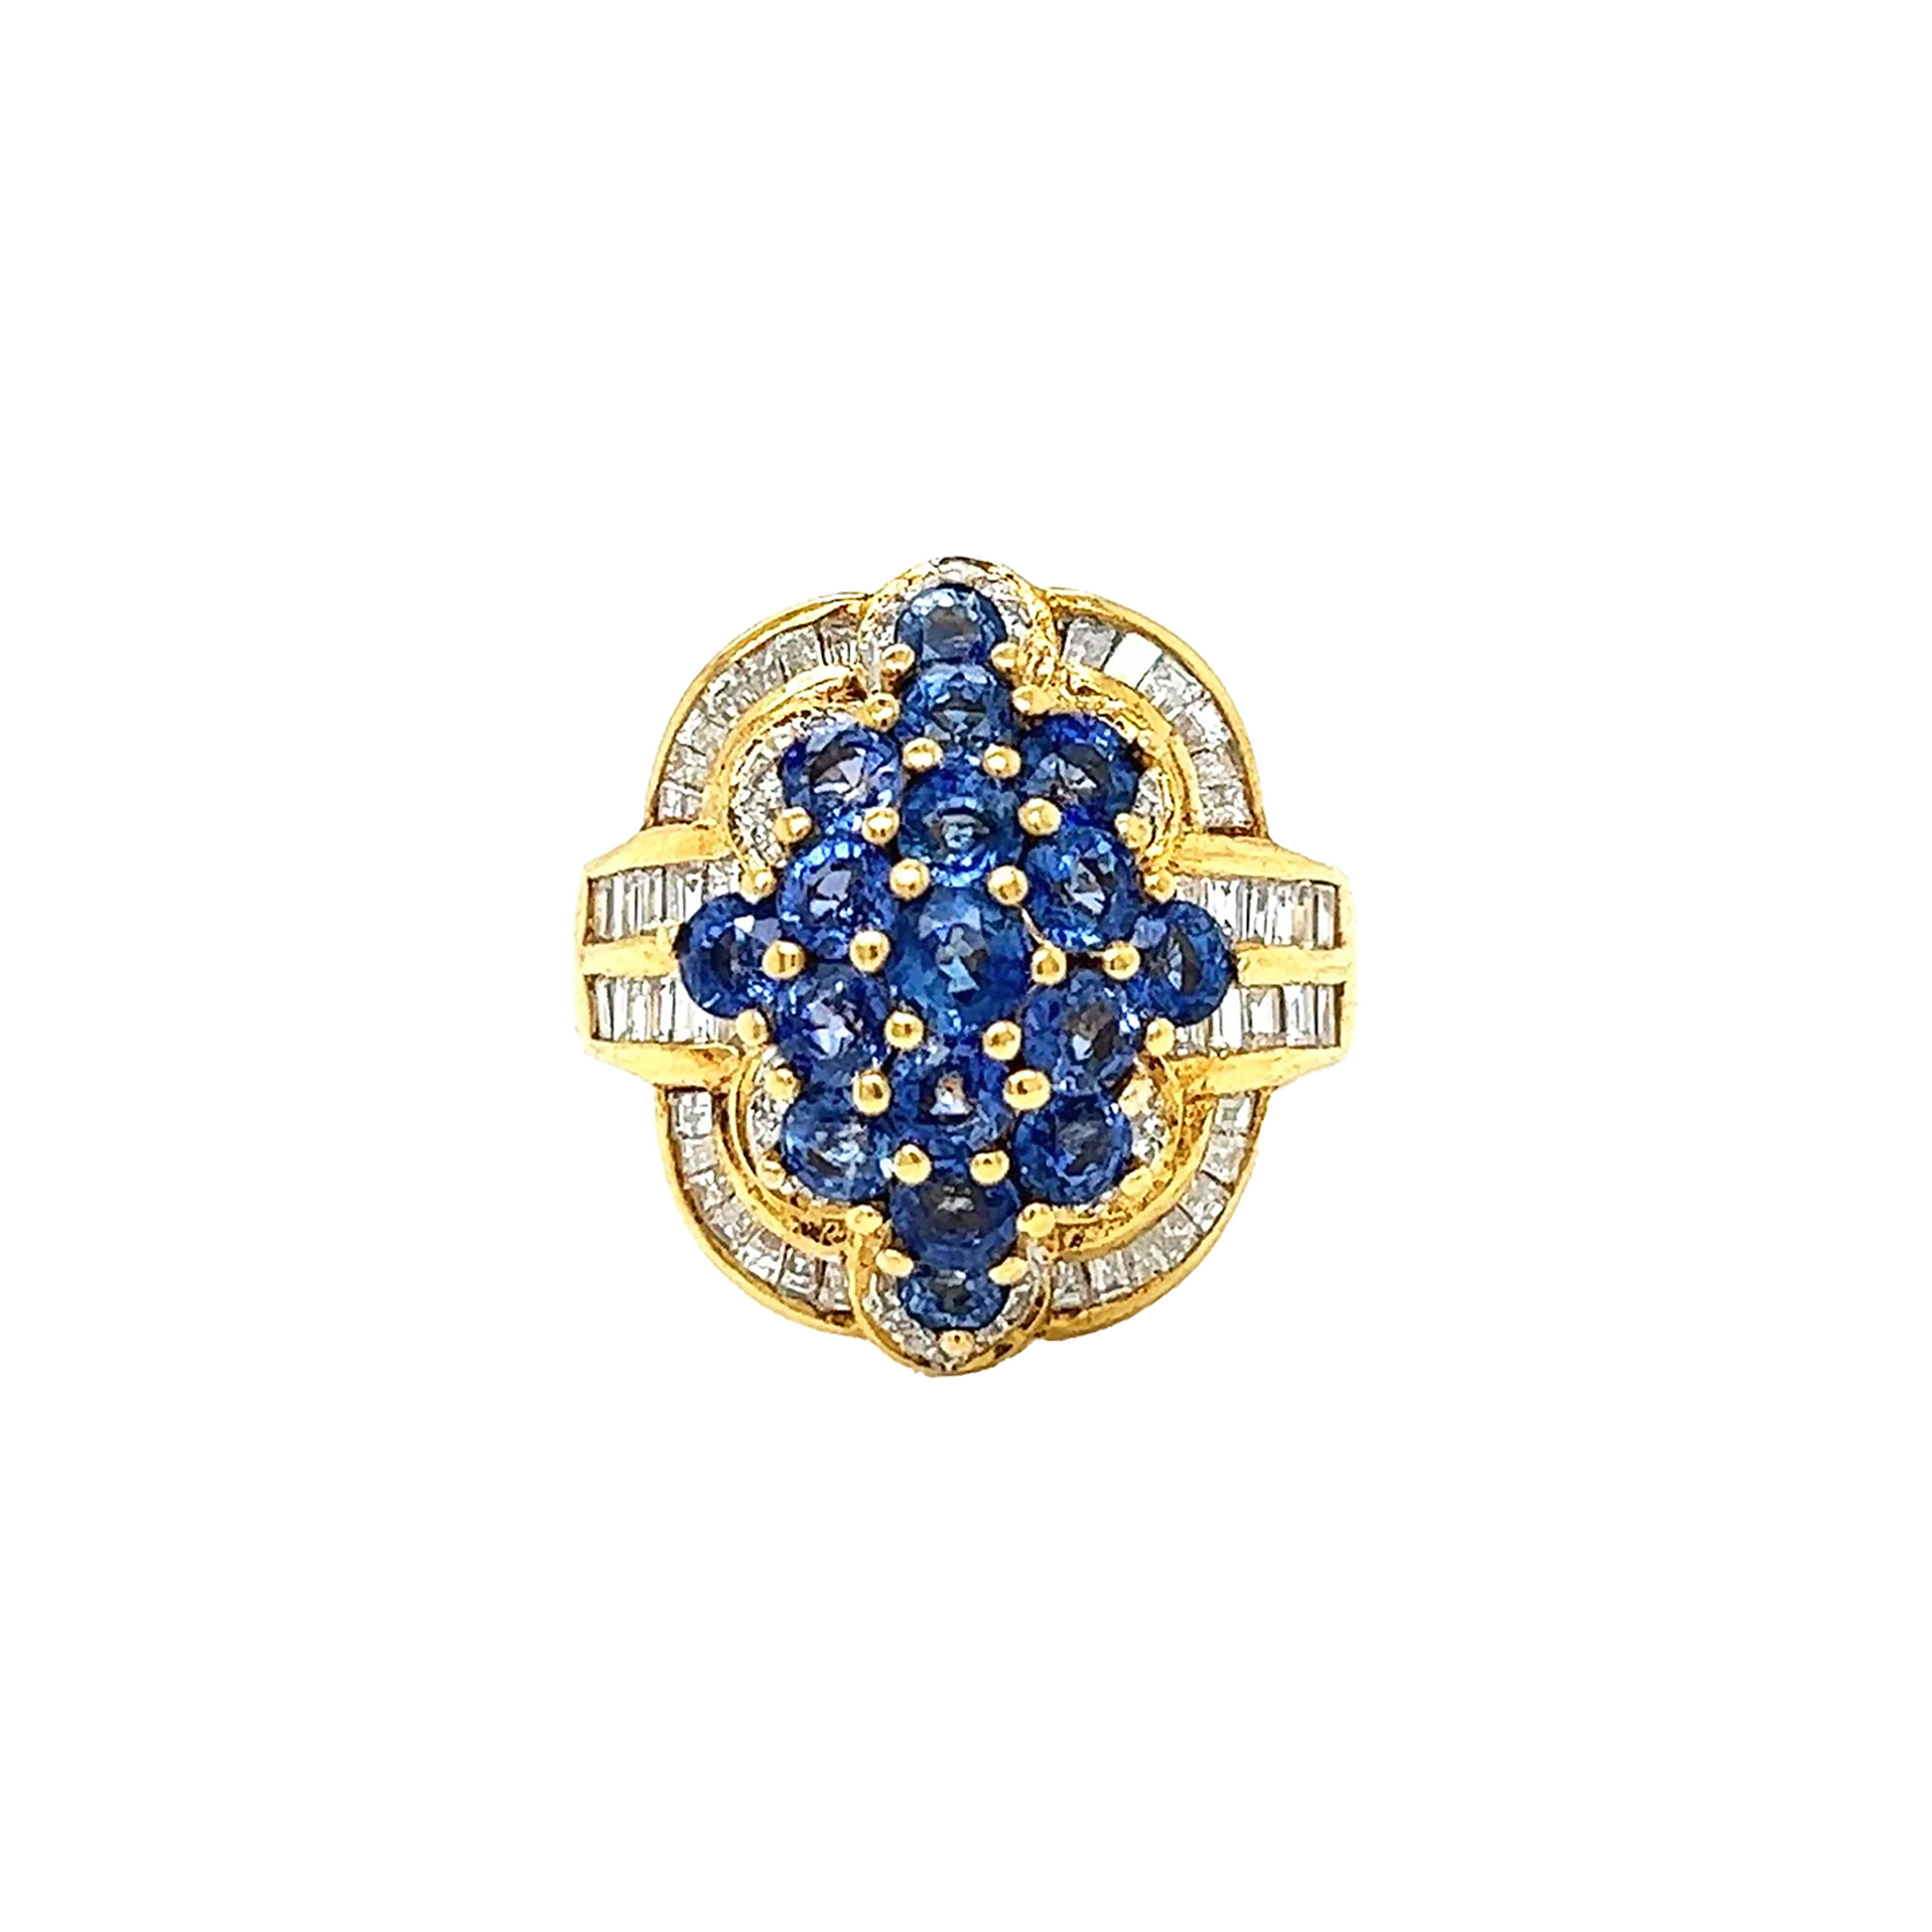 Post-1980s 18KT Yellow Gold Sapphire & Diamond Ring front